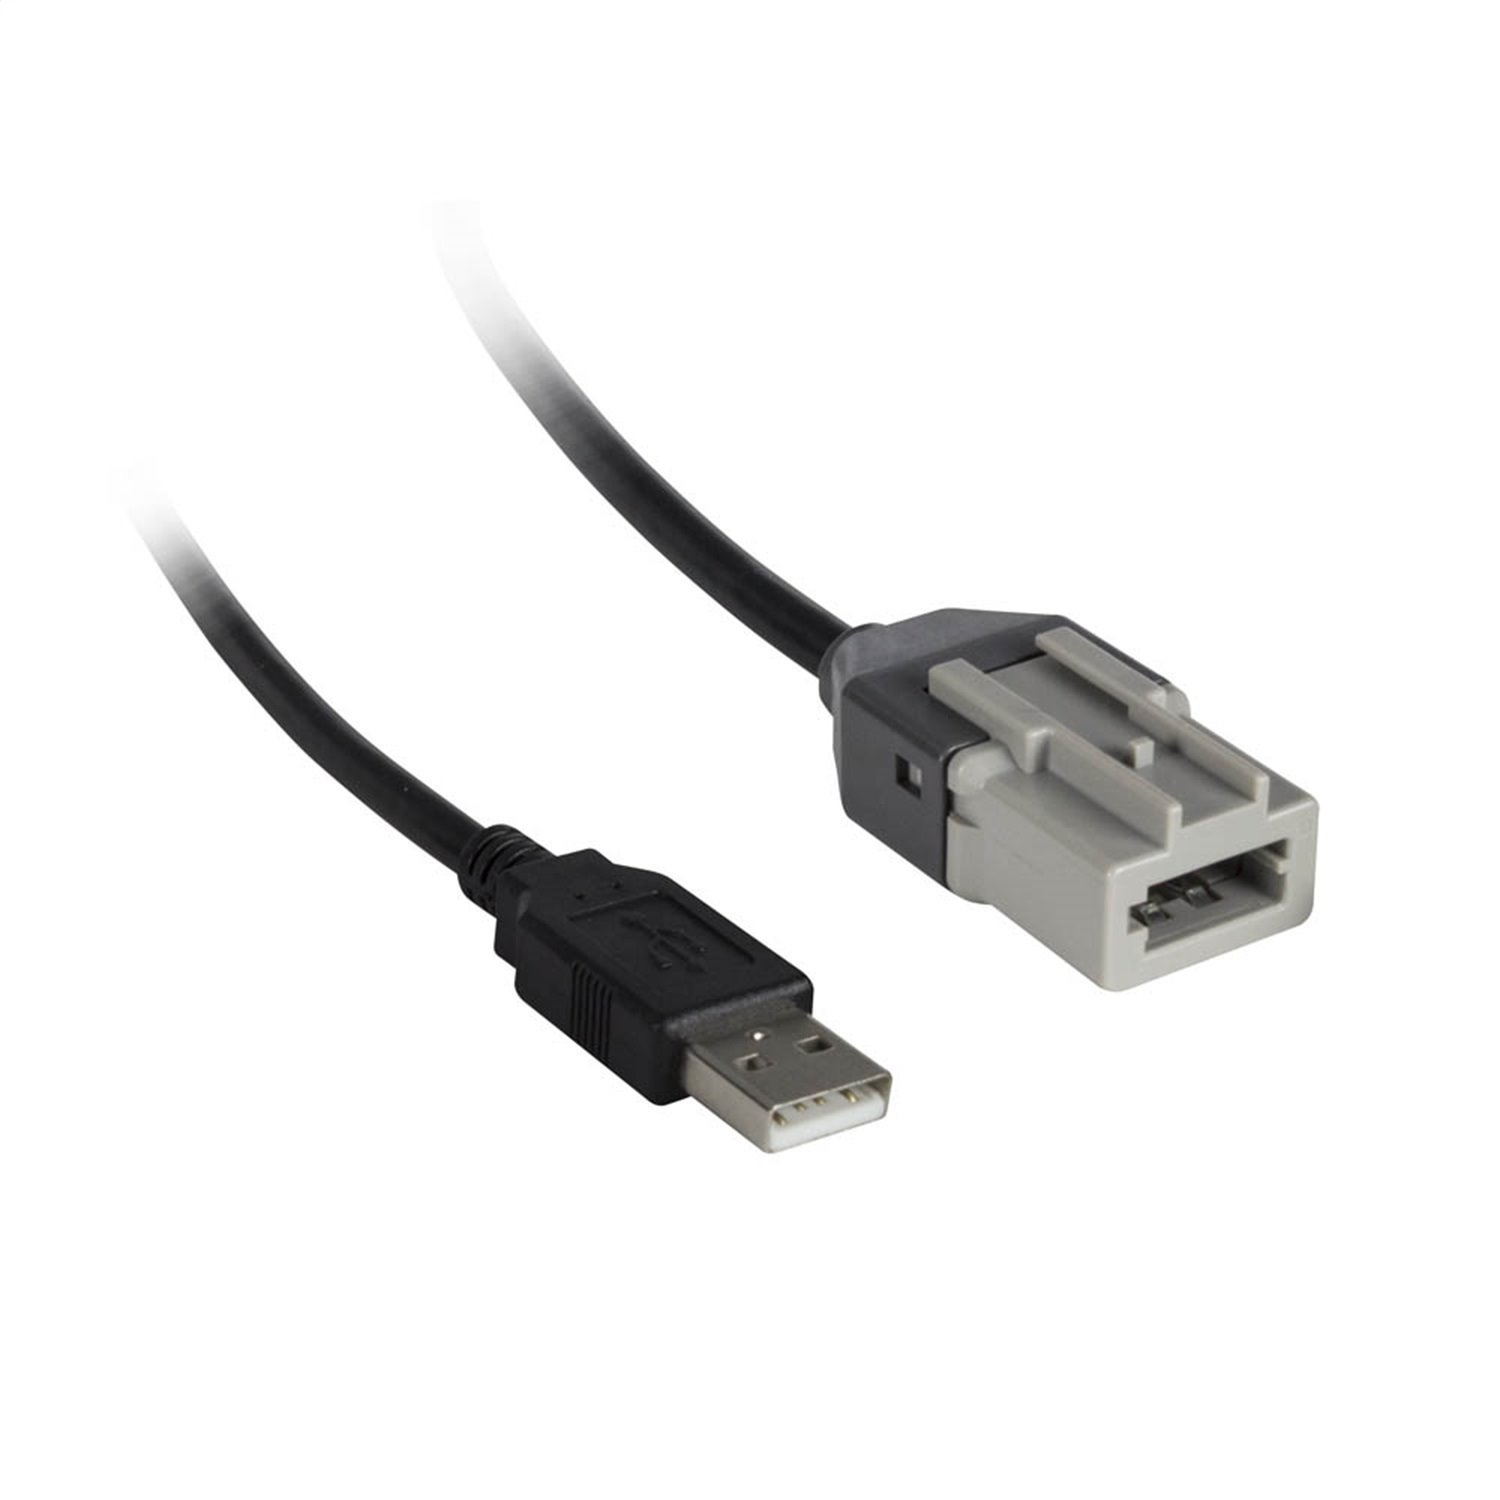 AXUSB-HK2 USB Adapter Cable Harness